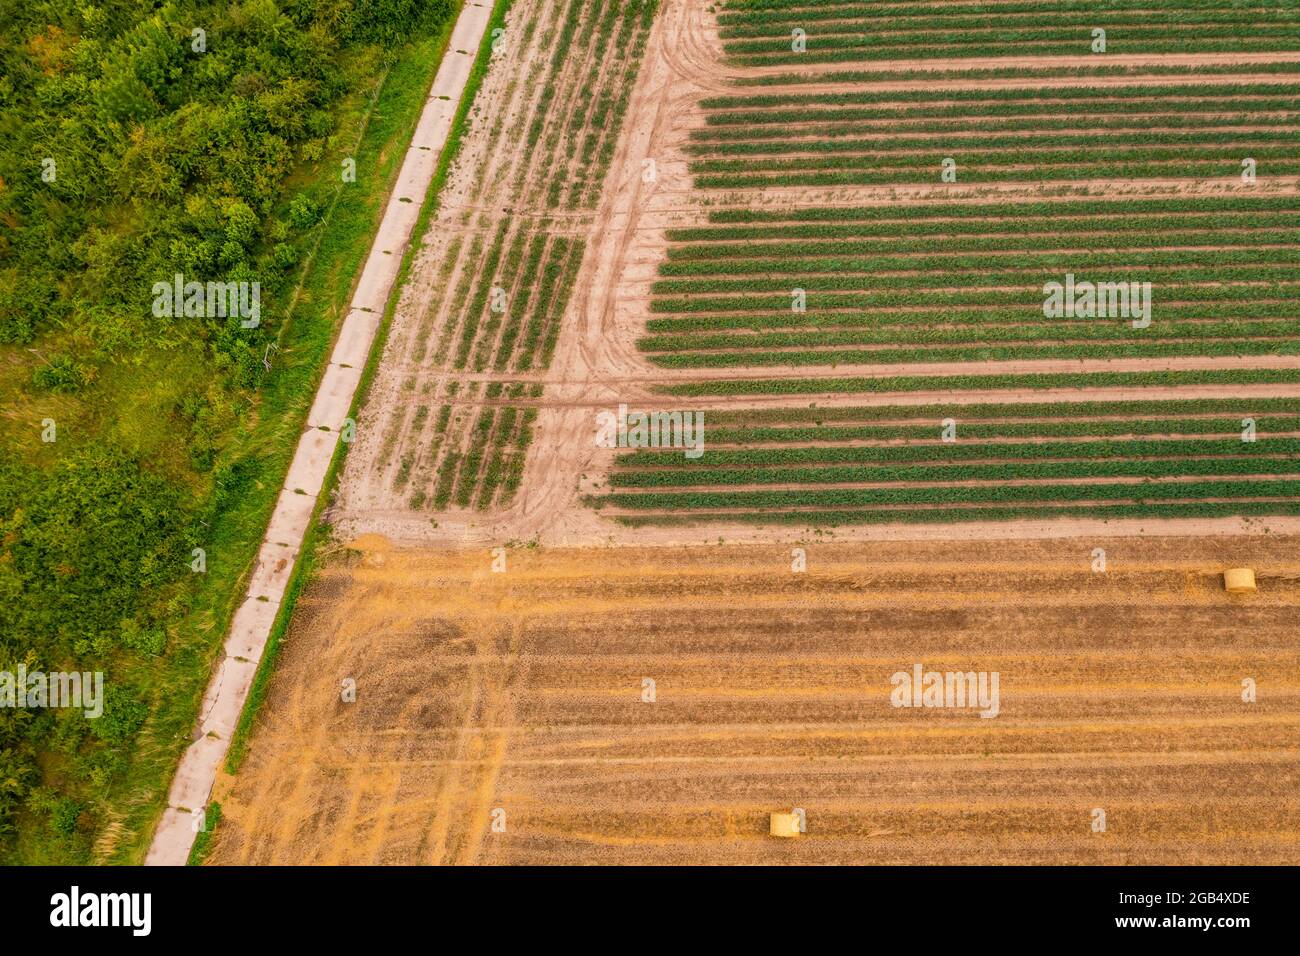 Aerial view of a piece of tree, a field with onions and a field after harvest with hay bales Stock Photo